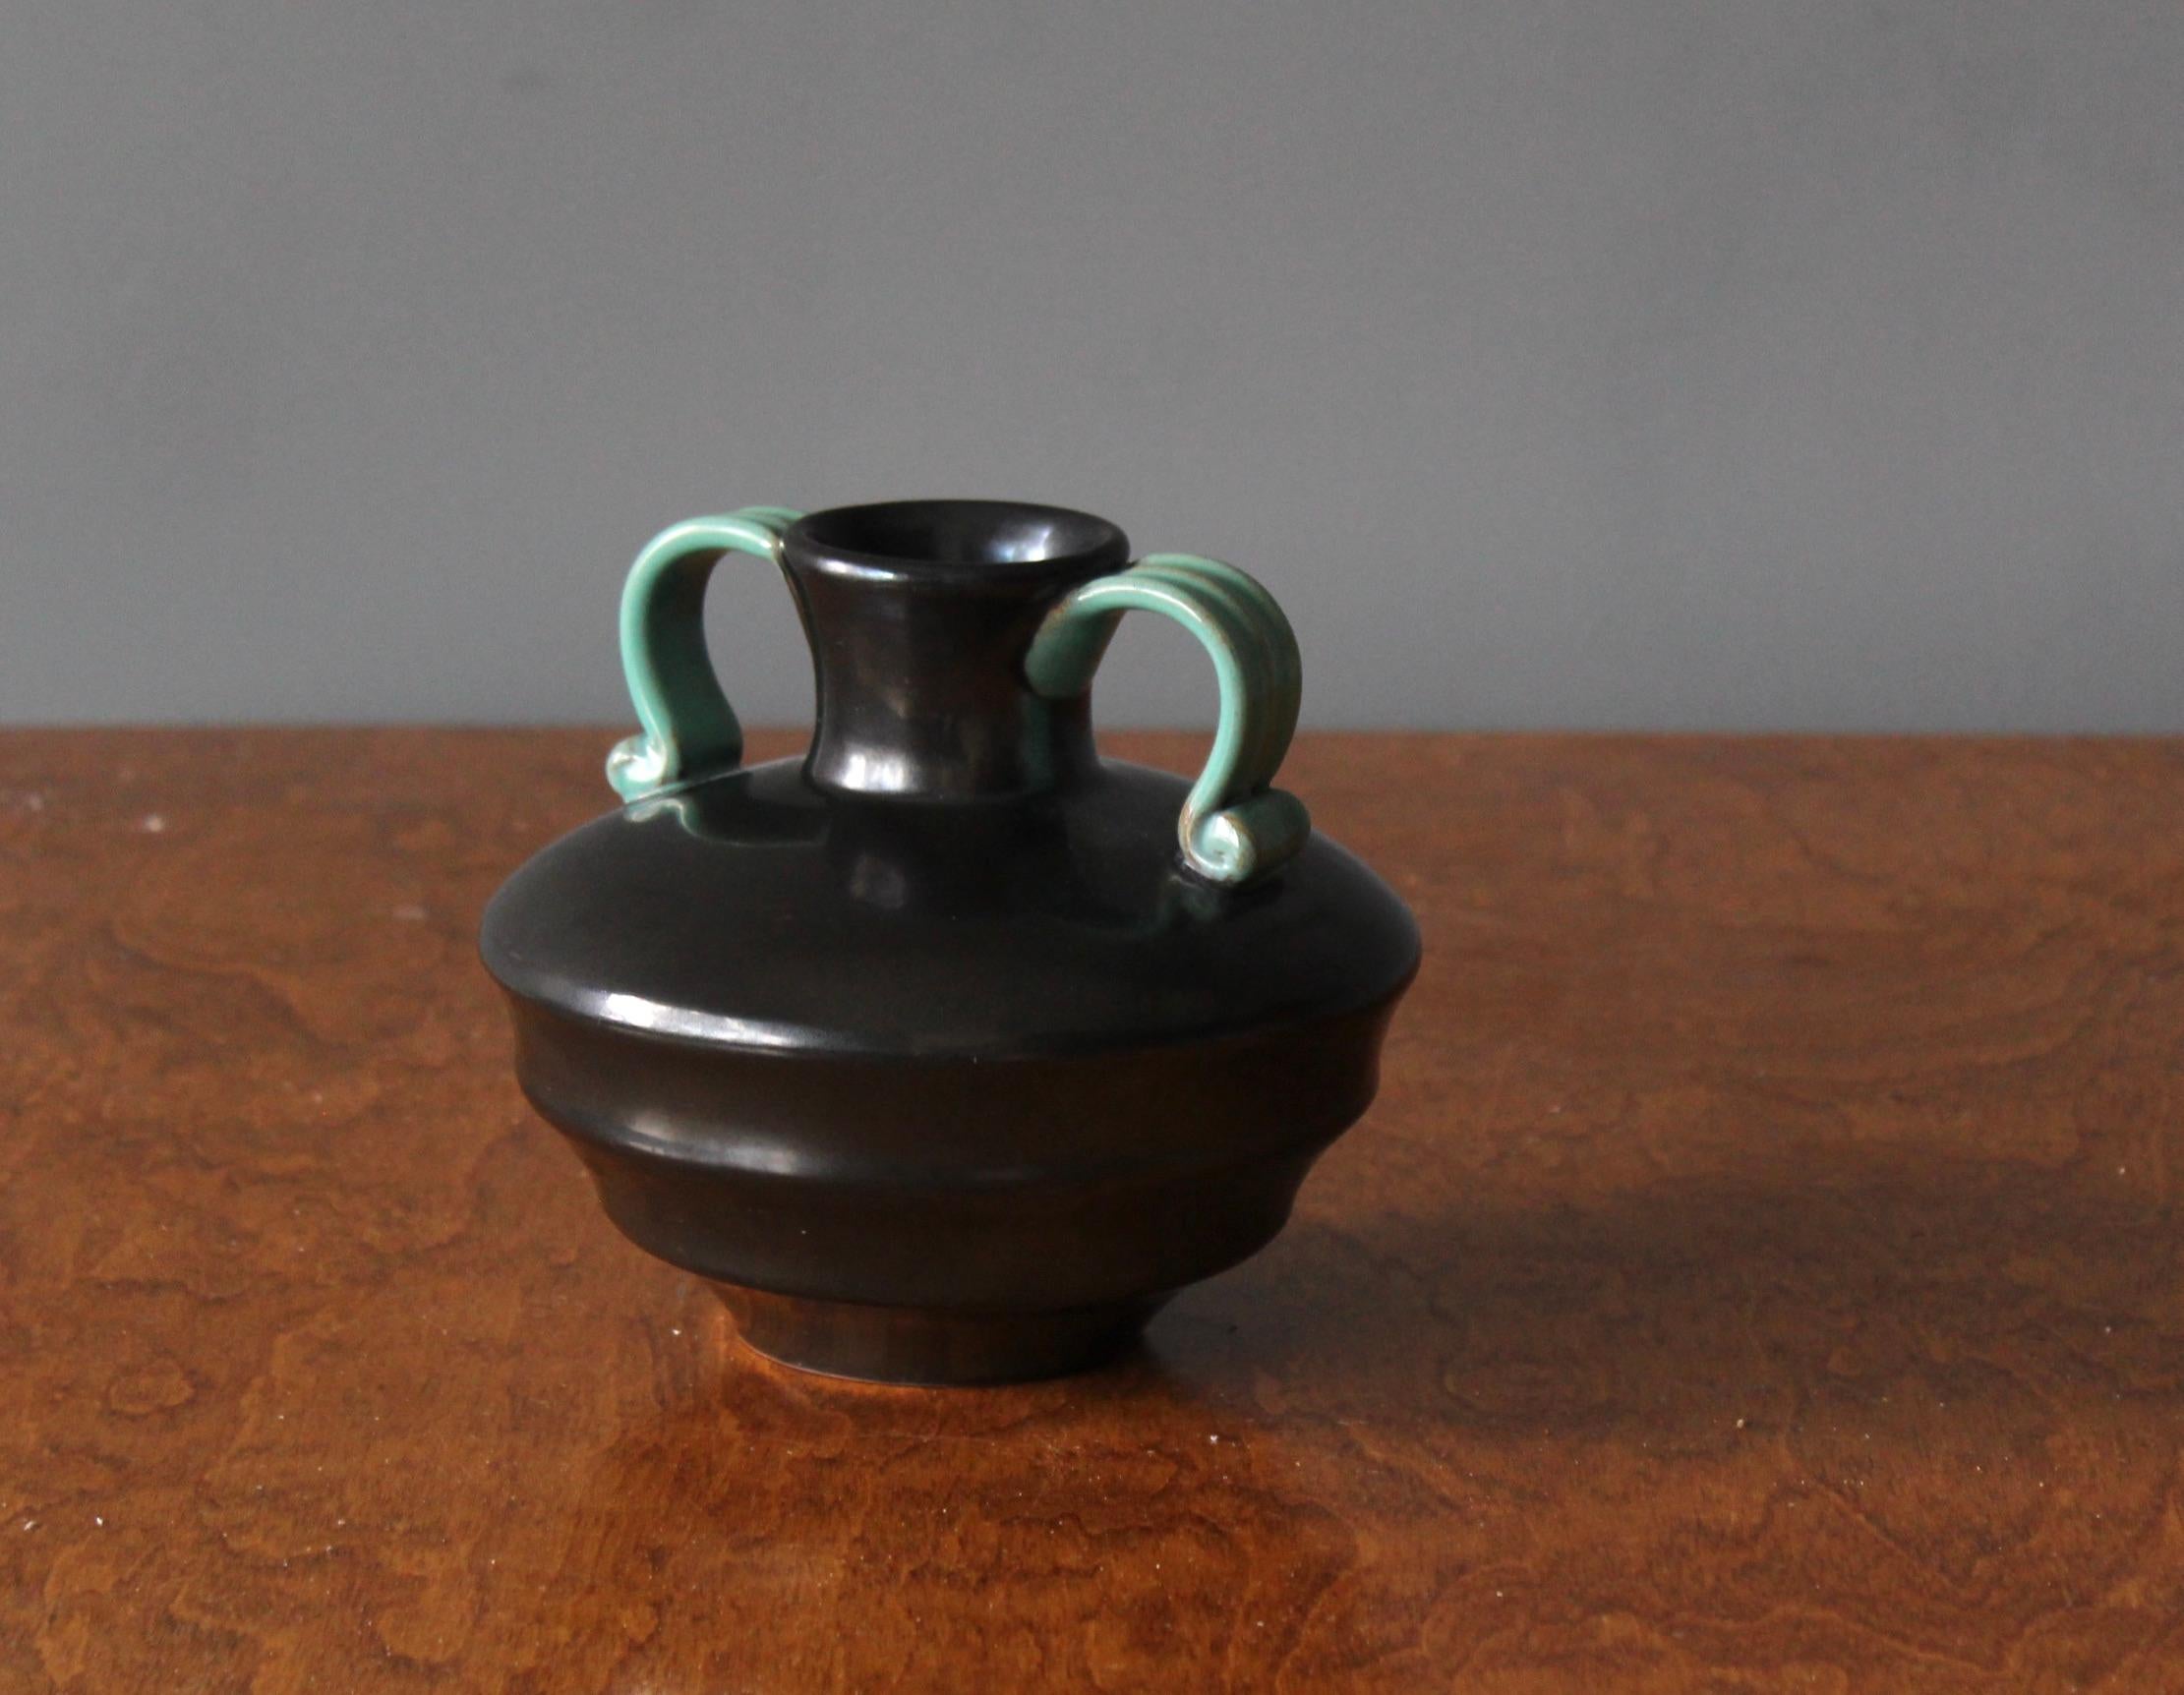 An early modernist vase. Produced by Upsala-Ekeby, Sweden, 1940s. Designed by Harald Östergren (1888-1974). Features black / green glaze. Earthenware.

Other designers of the period include Ettore Sottsass, Carl Harry Stålhane, Lisa Larsson, Axel